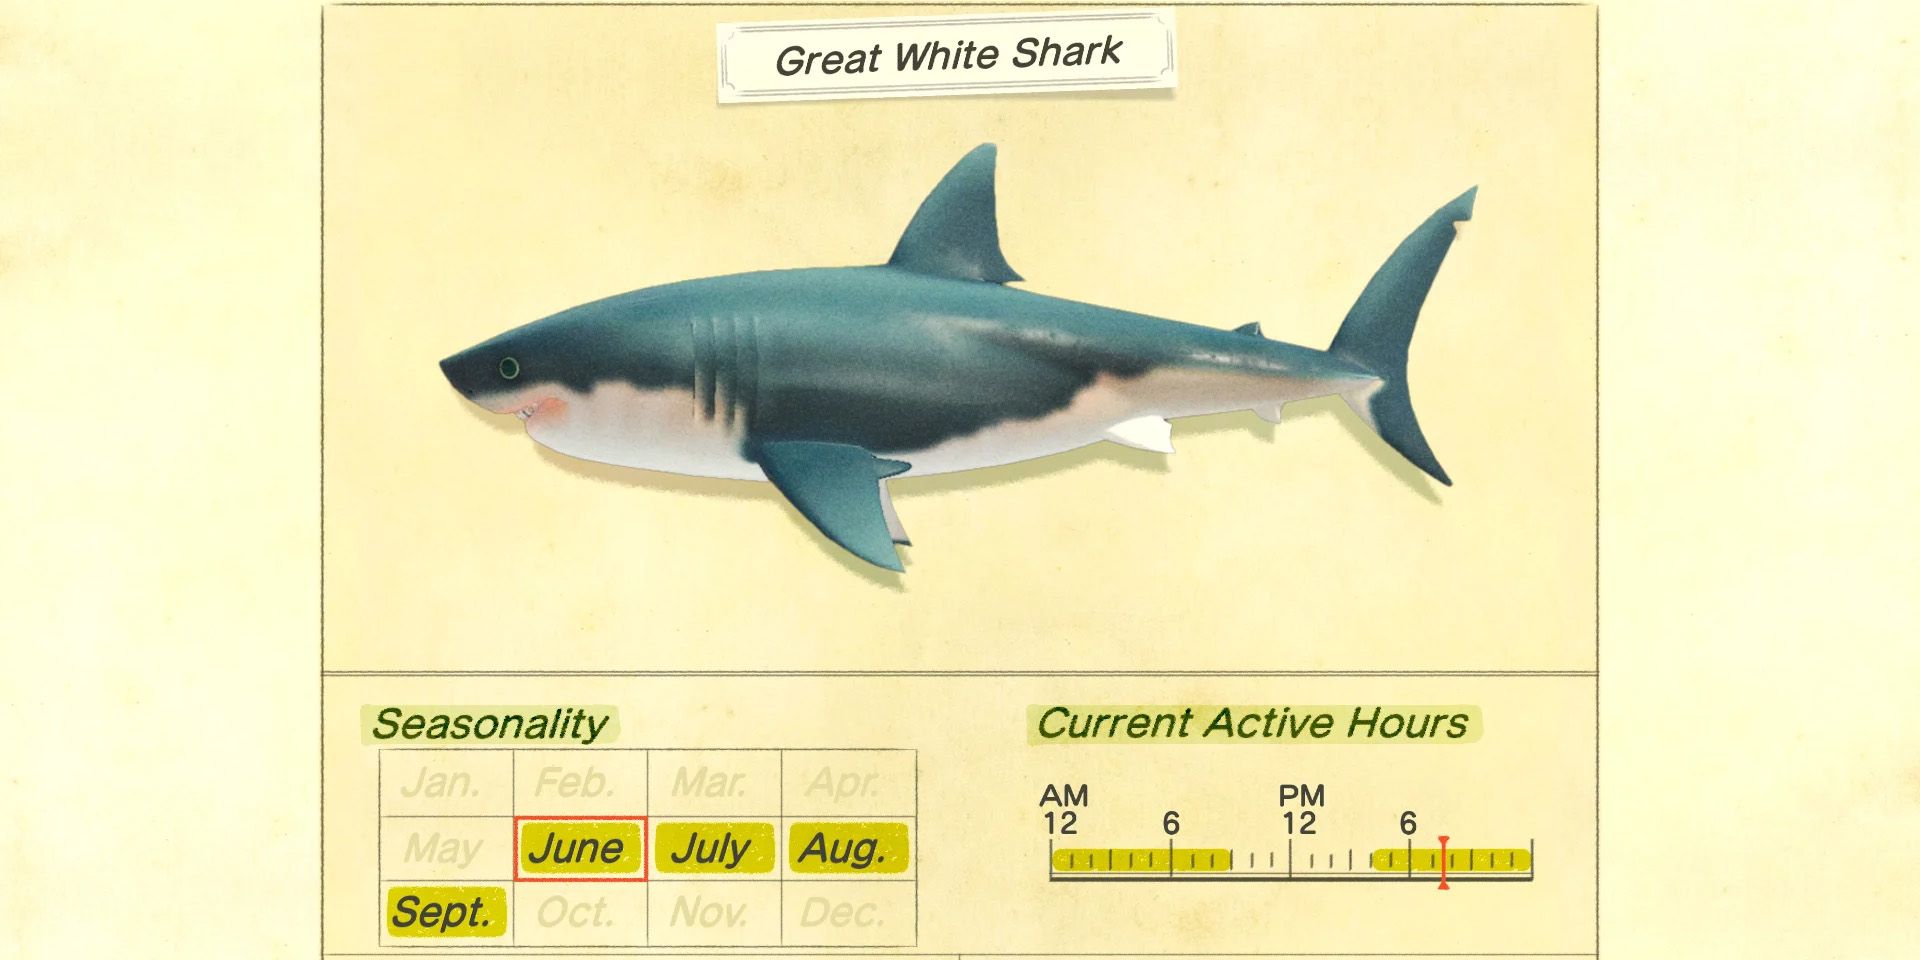 A Great White Shark in Animal Crossing: New Horizons